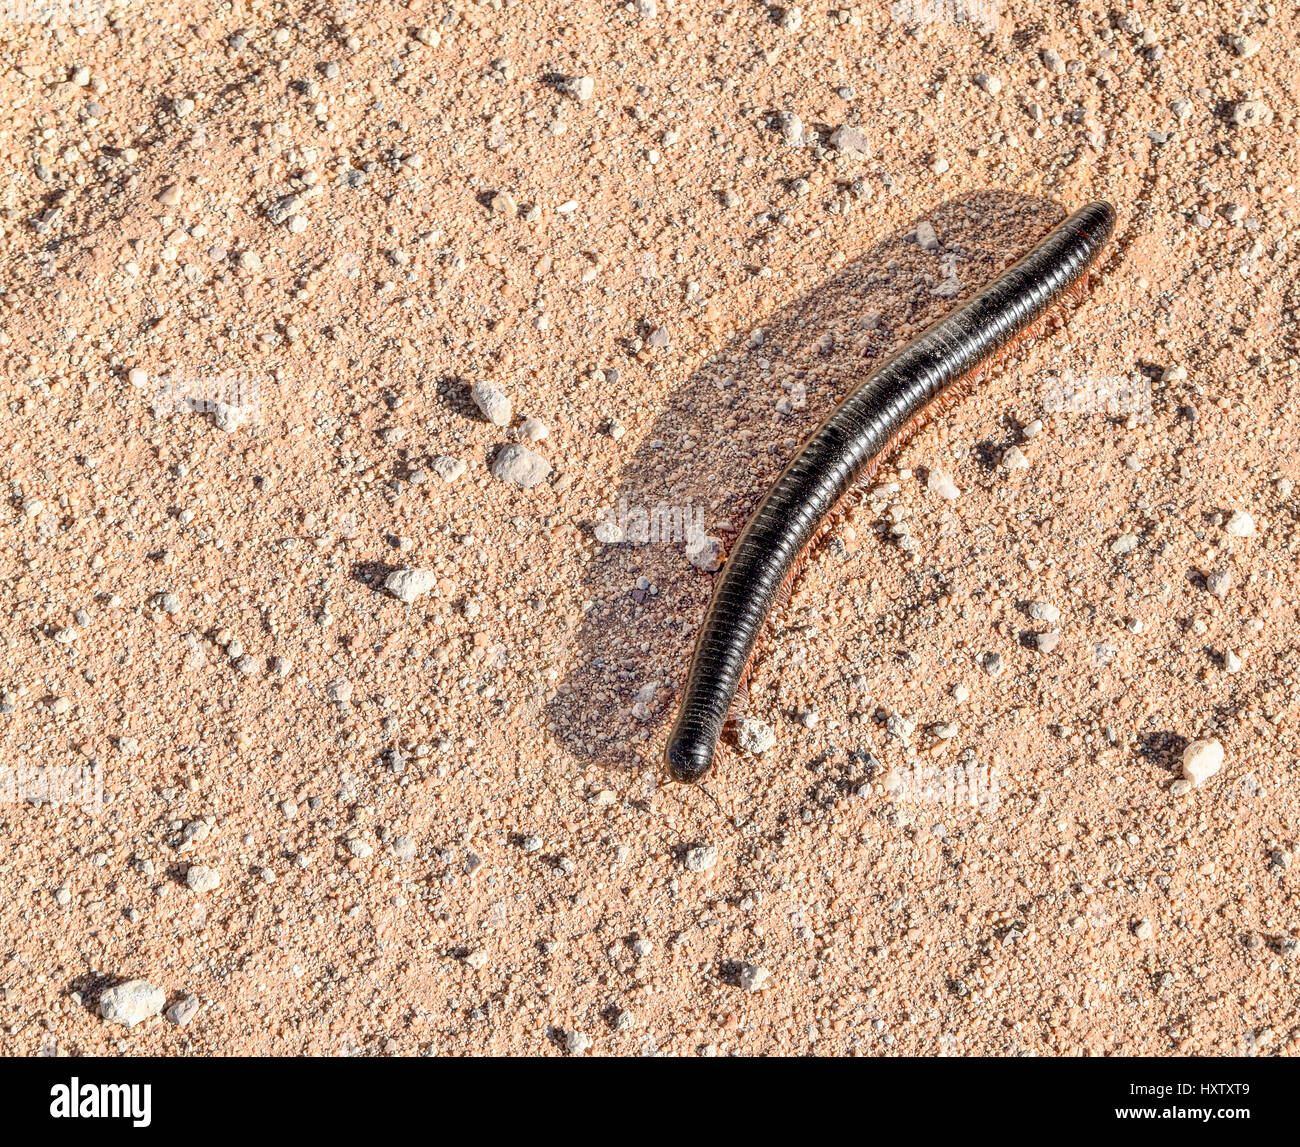 huge millipede on sandy ground in Namibia, Africa Stock Photo